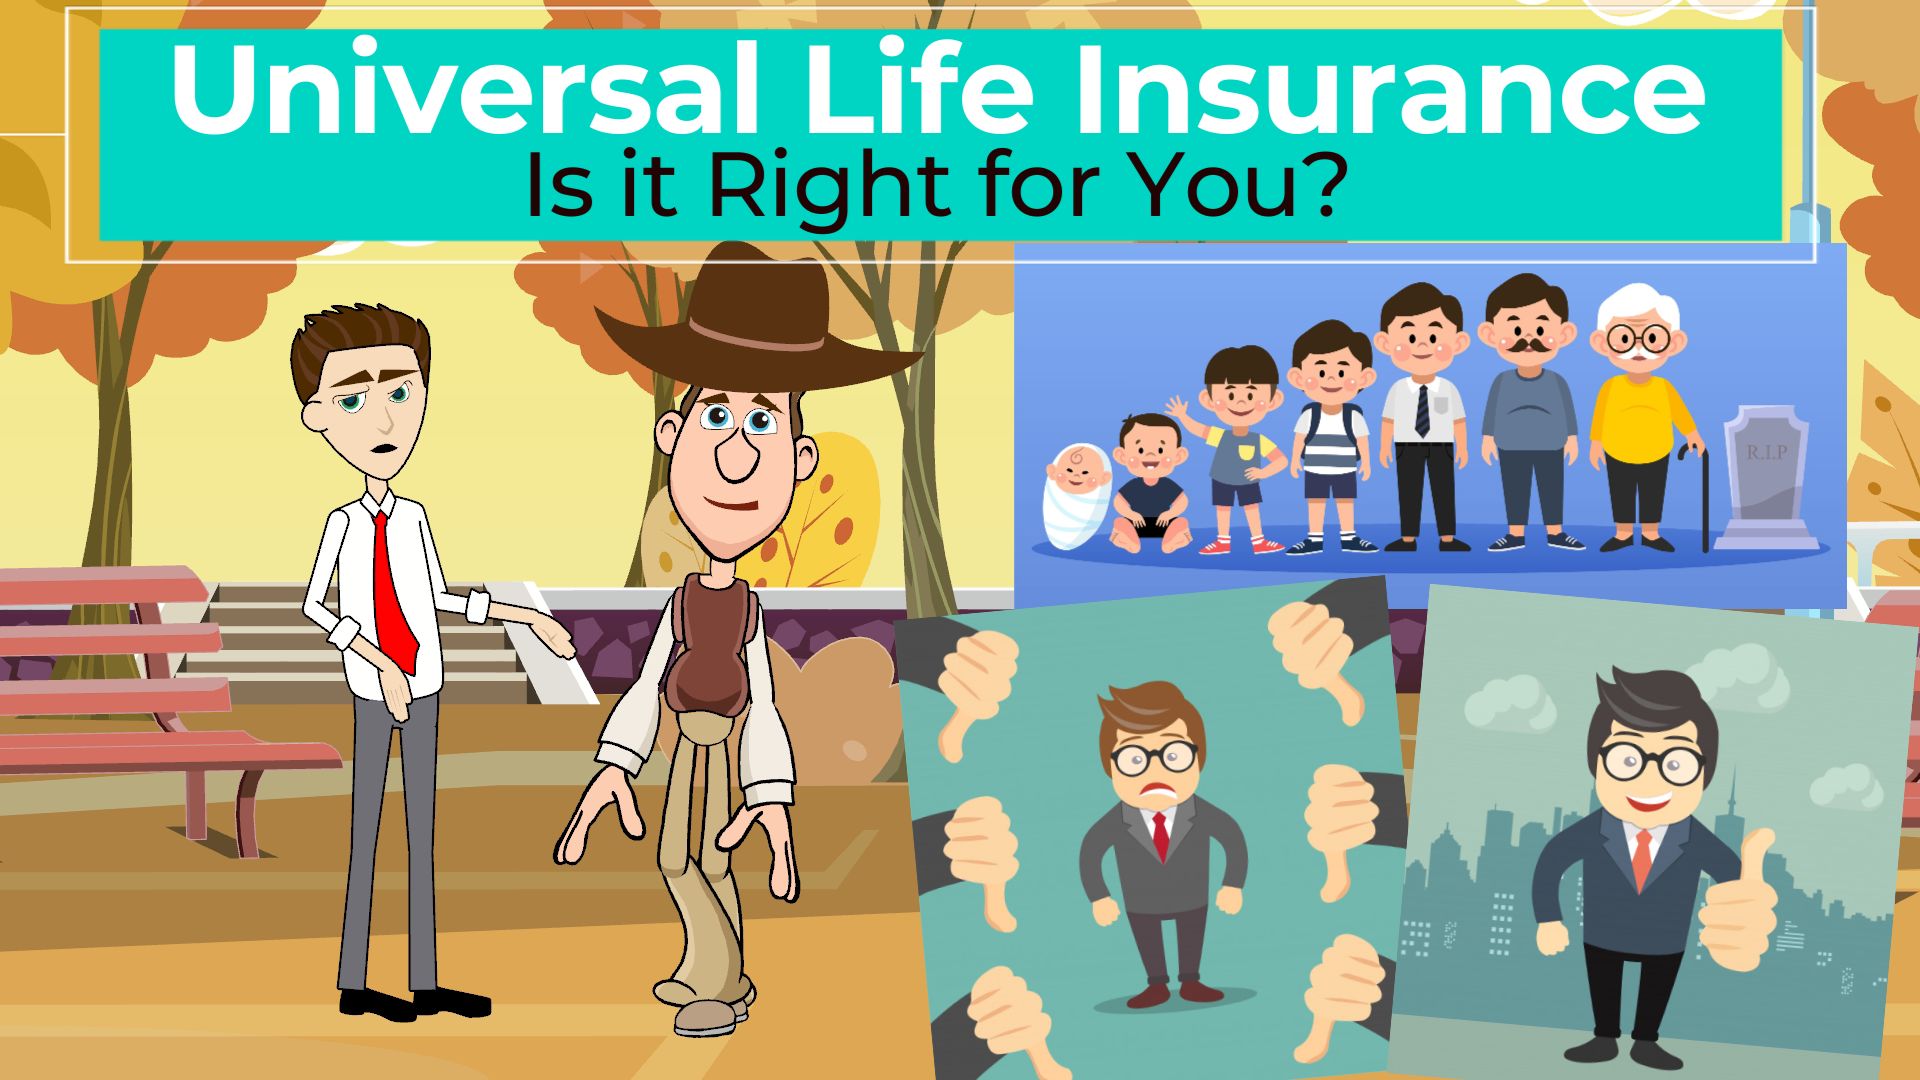 Universal life insurance - Is it Right for You